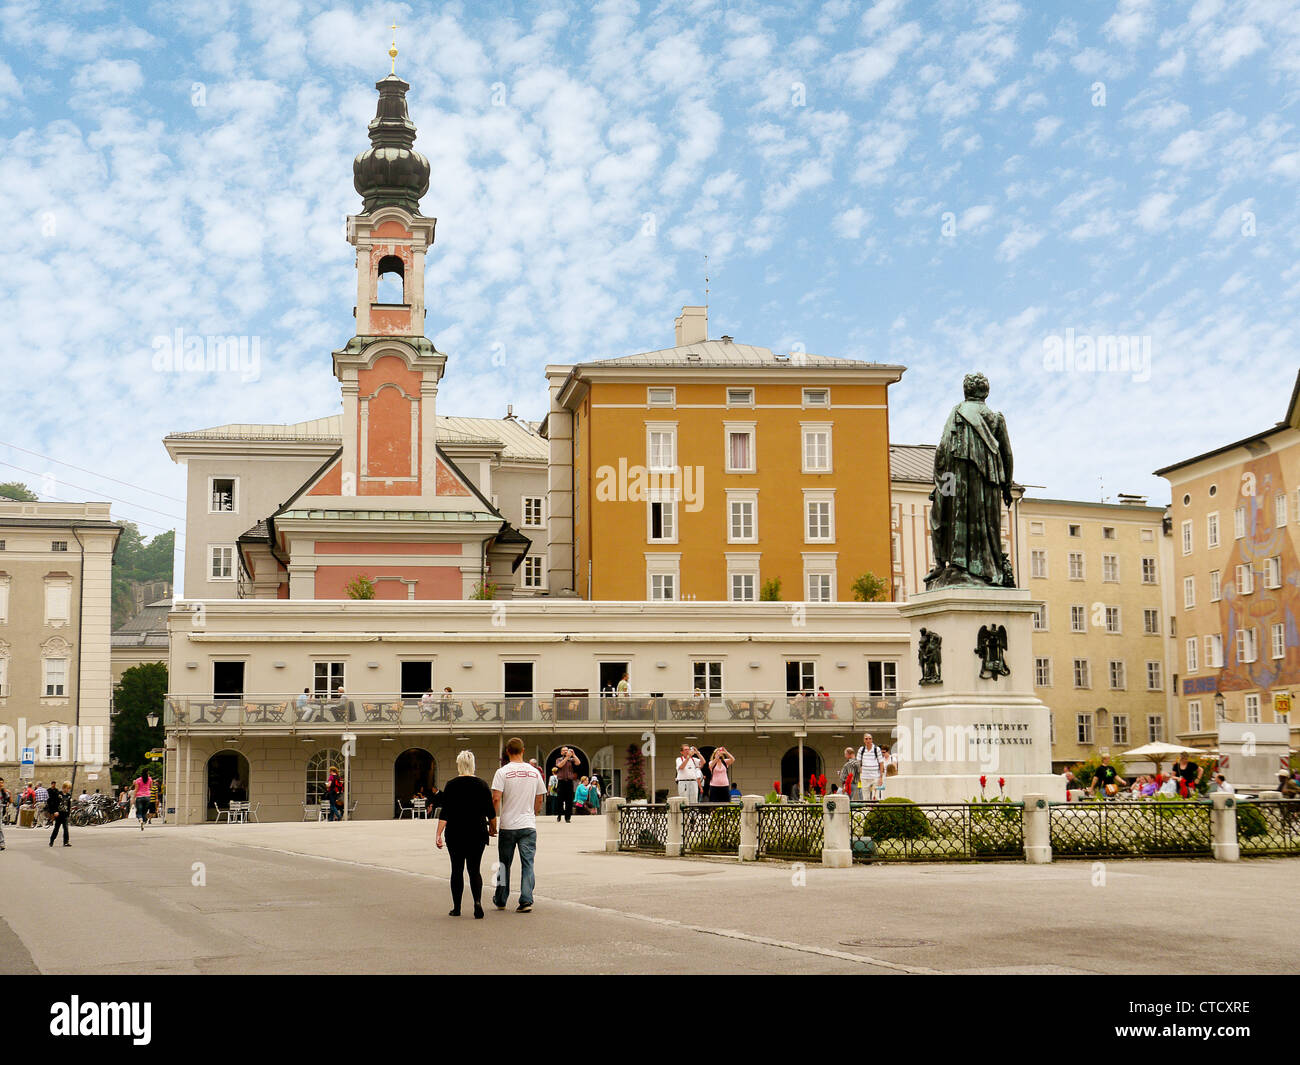 A statue of Motzart in Residenz Platz in the histocal and old City of Salzburg, Austria Stock Photo